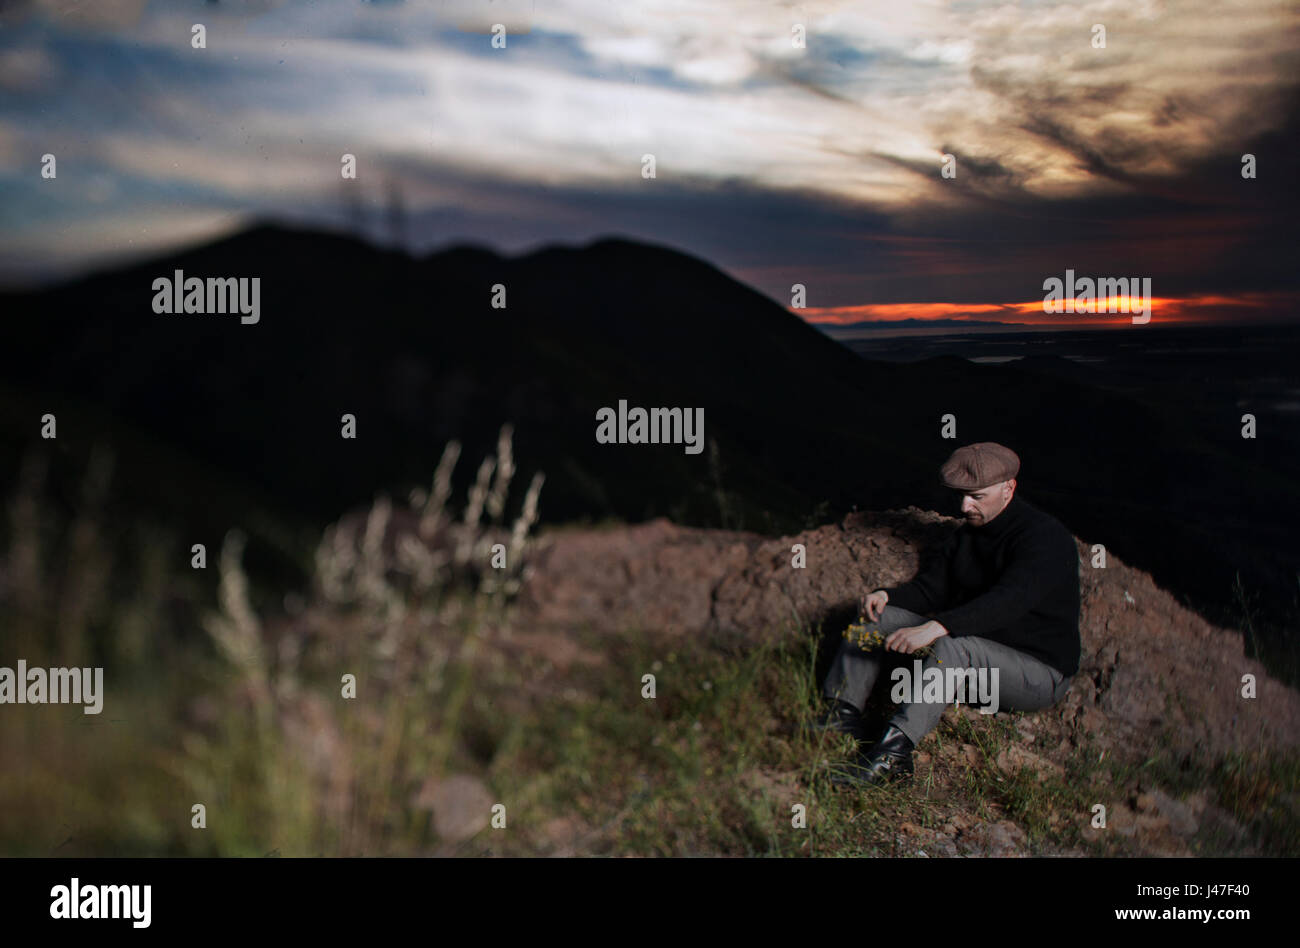 Man with red goatee wearing black turtleneck fisherman's sweater and brown newsboy cap sitting on a cliff with dramatic sunset and clouds Stock Photo